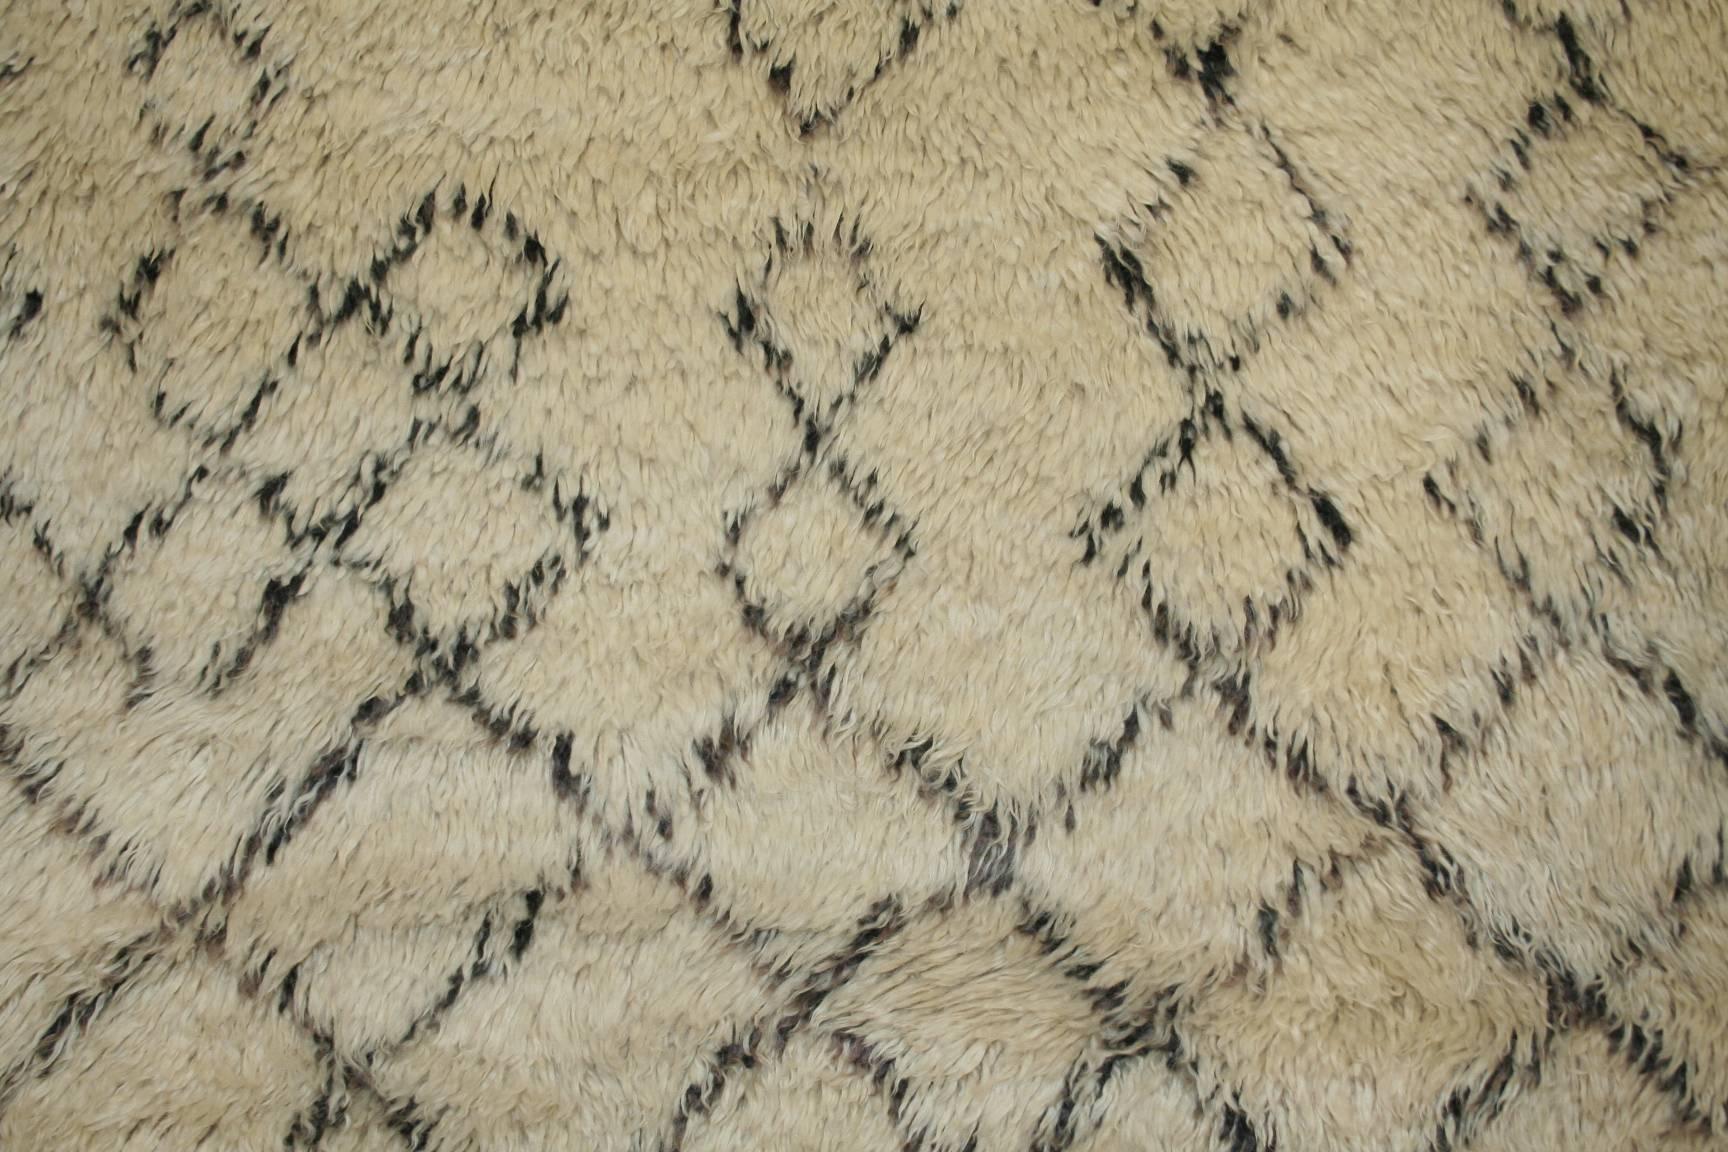 The rugs of the Beni Ouarain tribal confederacy differ from other Berber weavings in that they are woven almost exclusively on an ivory background and decorated with abstract geometric motifs in undyed natural brown/black wool. The pattern is